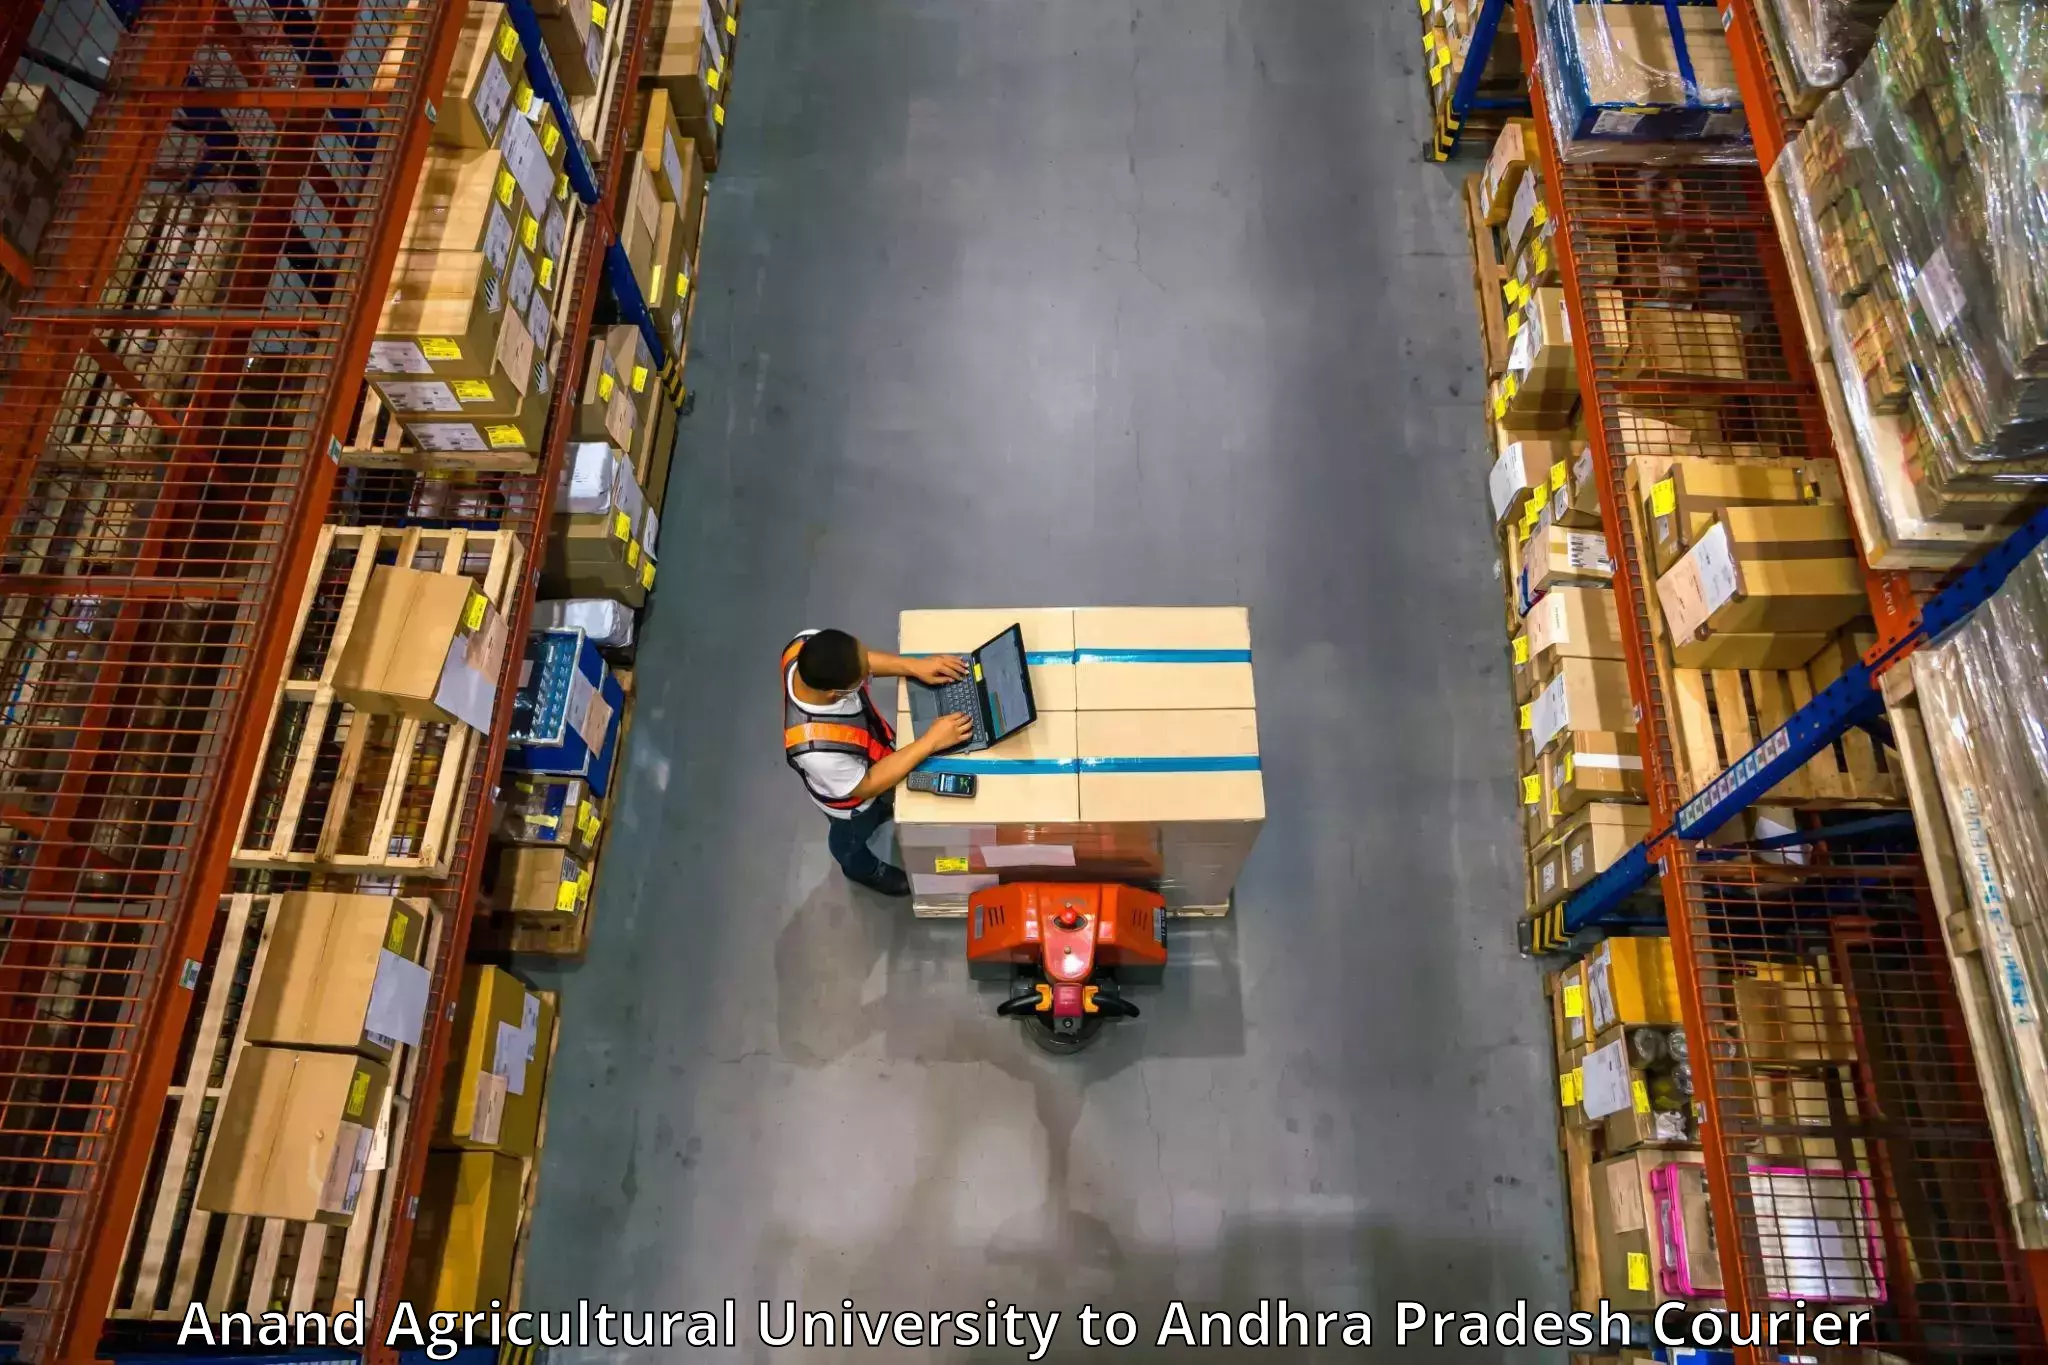 Expert goods movers Anand Agricultural University to Andhra Pradesh